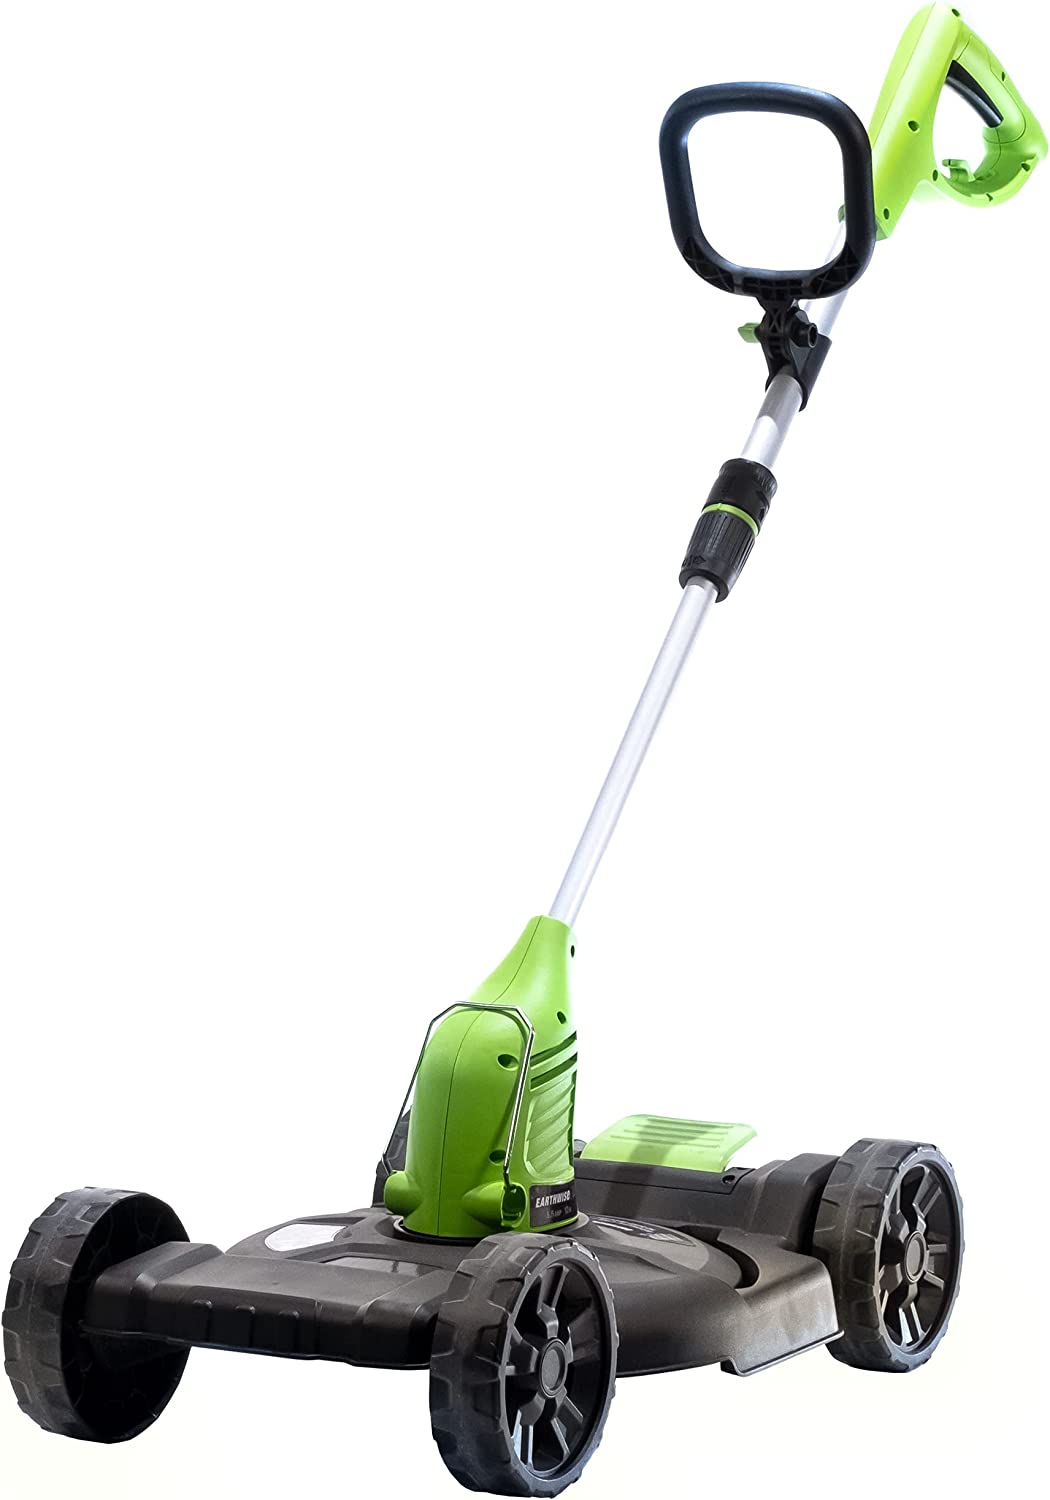 Eearthwise 5.5A 12" Corded String Trimmer/Mower Combo